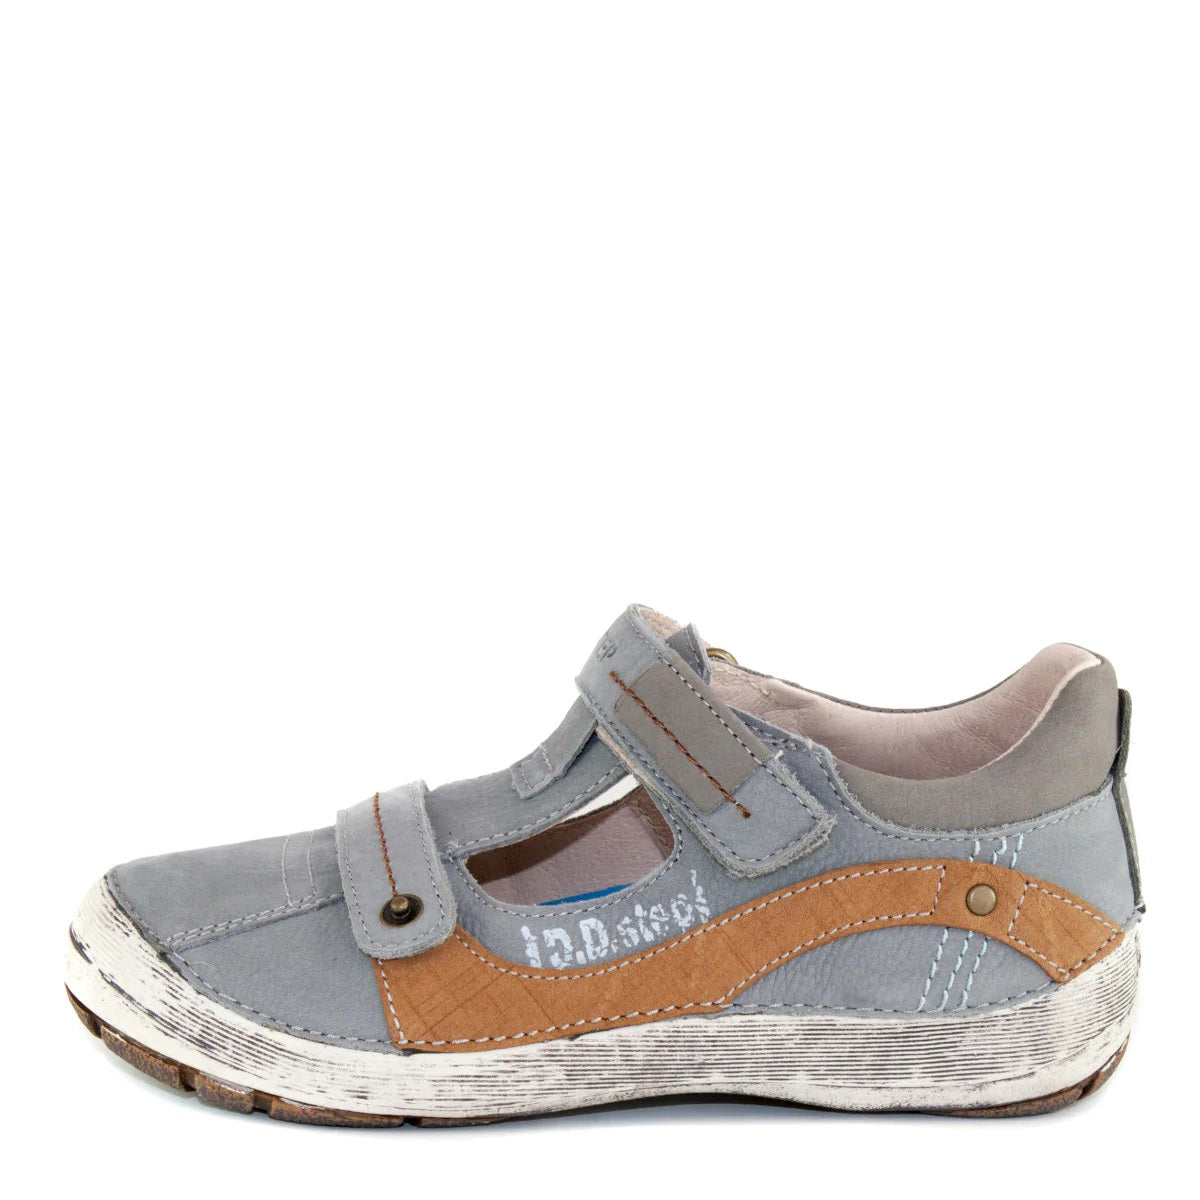 Premium quality closed toe sandals with genuine leather lining and upper in grey with brown wave and double velcro strap. Thanks to its high level of specialization, D.D. Step knows exactly what your child’s feet need, to develop properly in the various phases of growth. The exceptional comfort these shoes provide assure the well-being and happiness of your child.